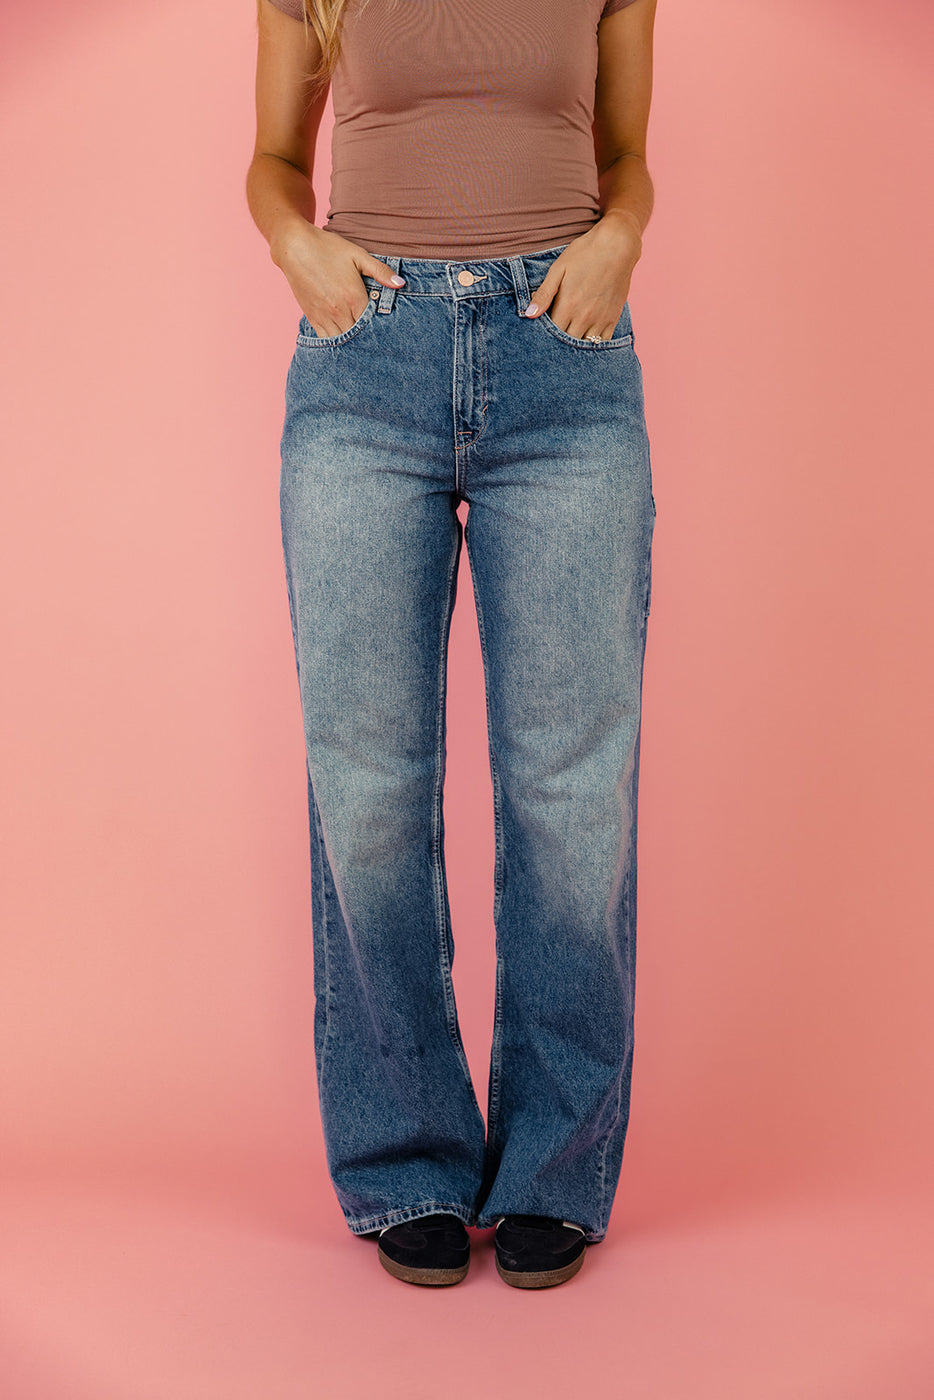 a person wearing blue jeans